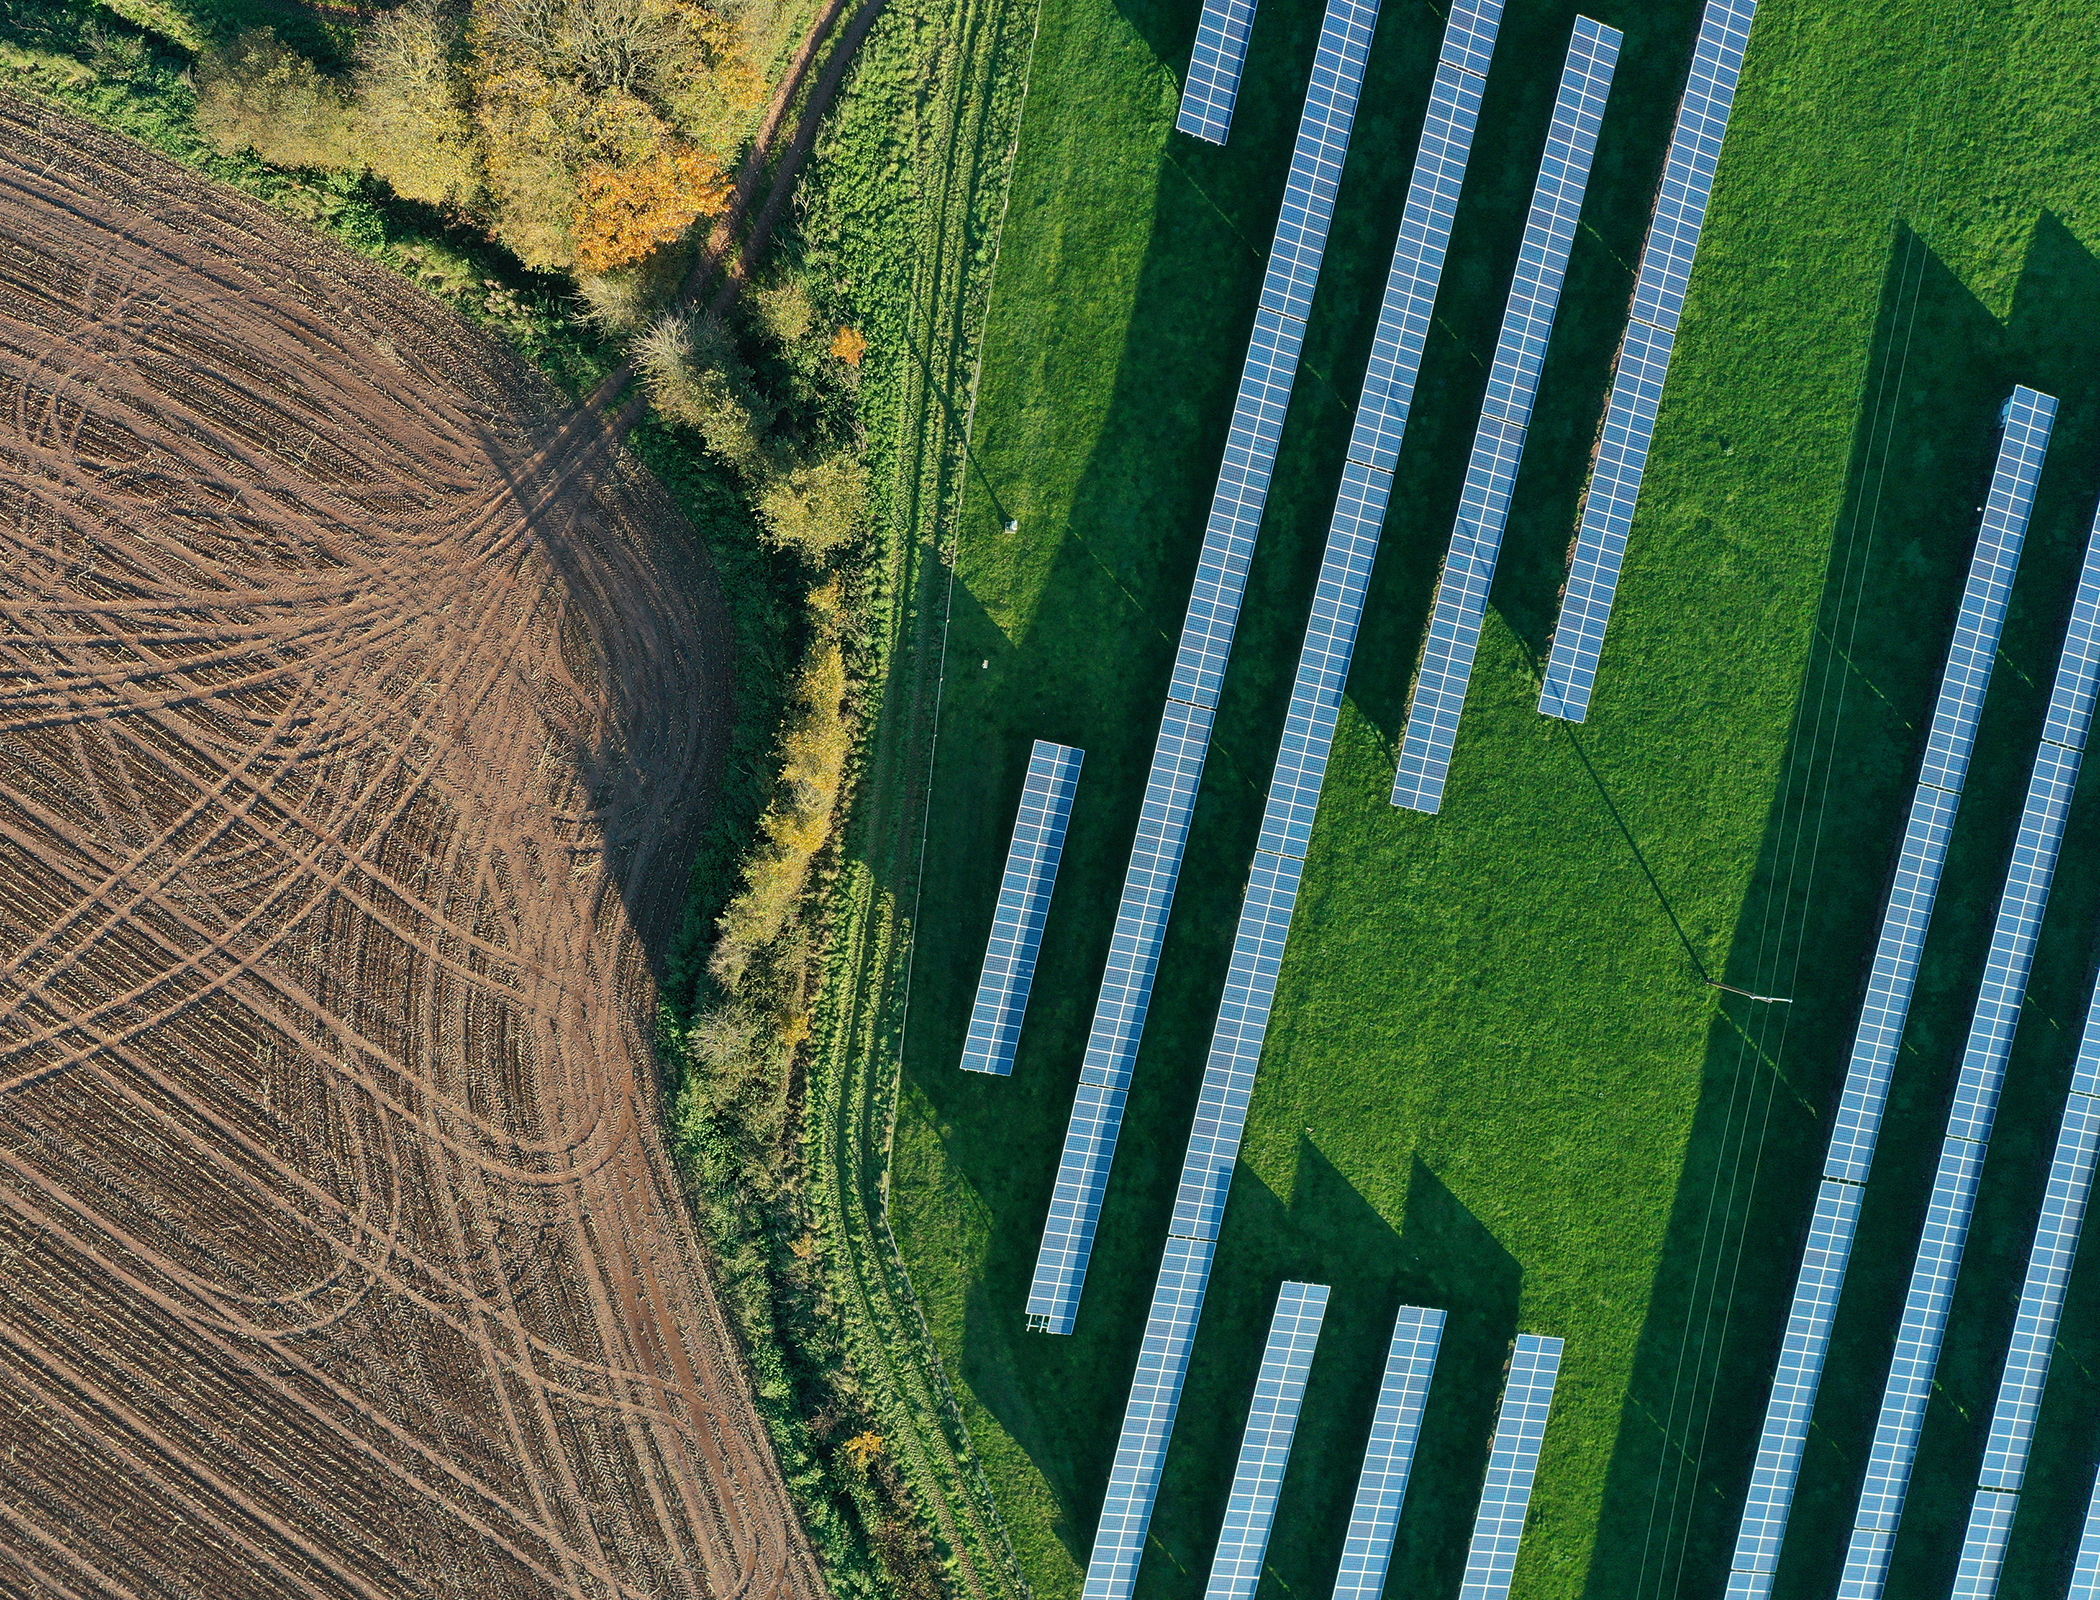 Proposed solar farm restrictions would slap £5bn energy bill on UK households